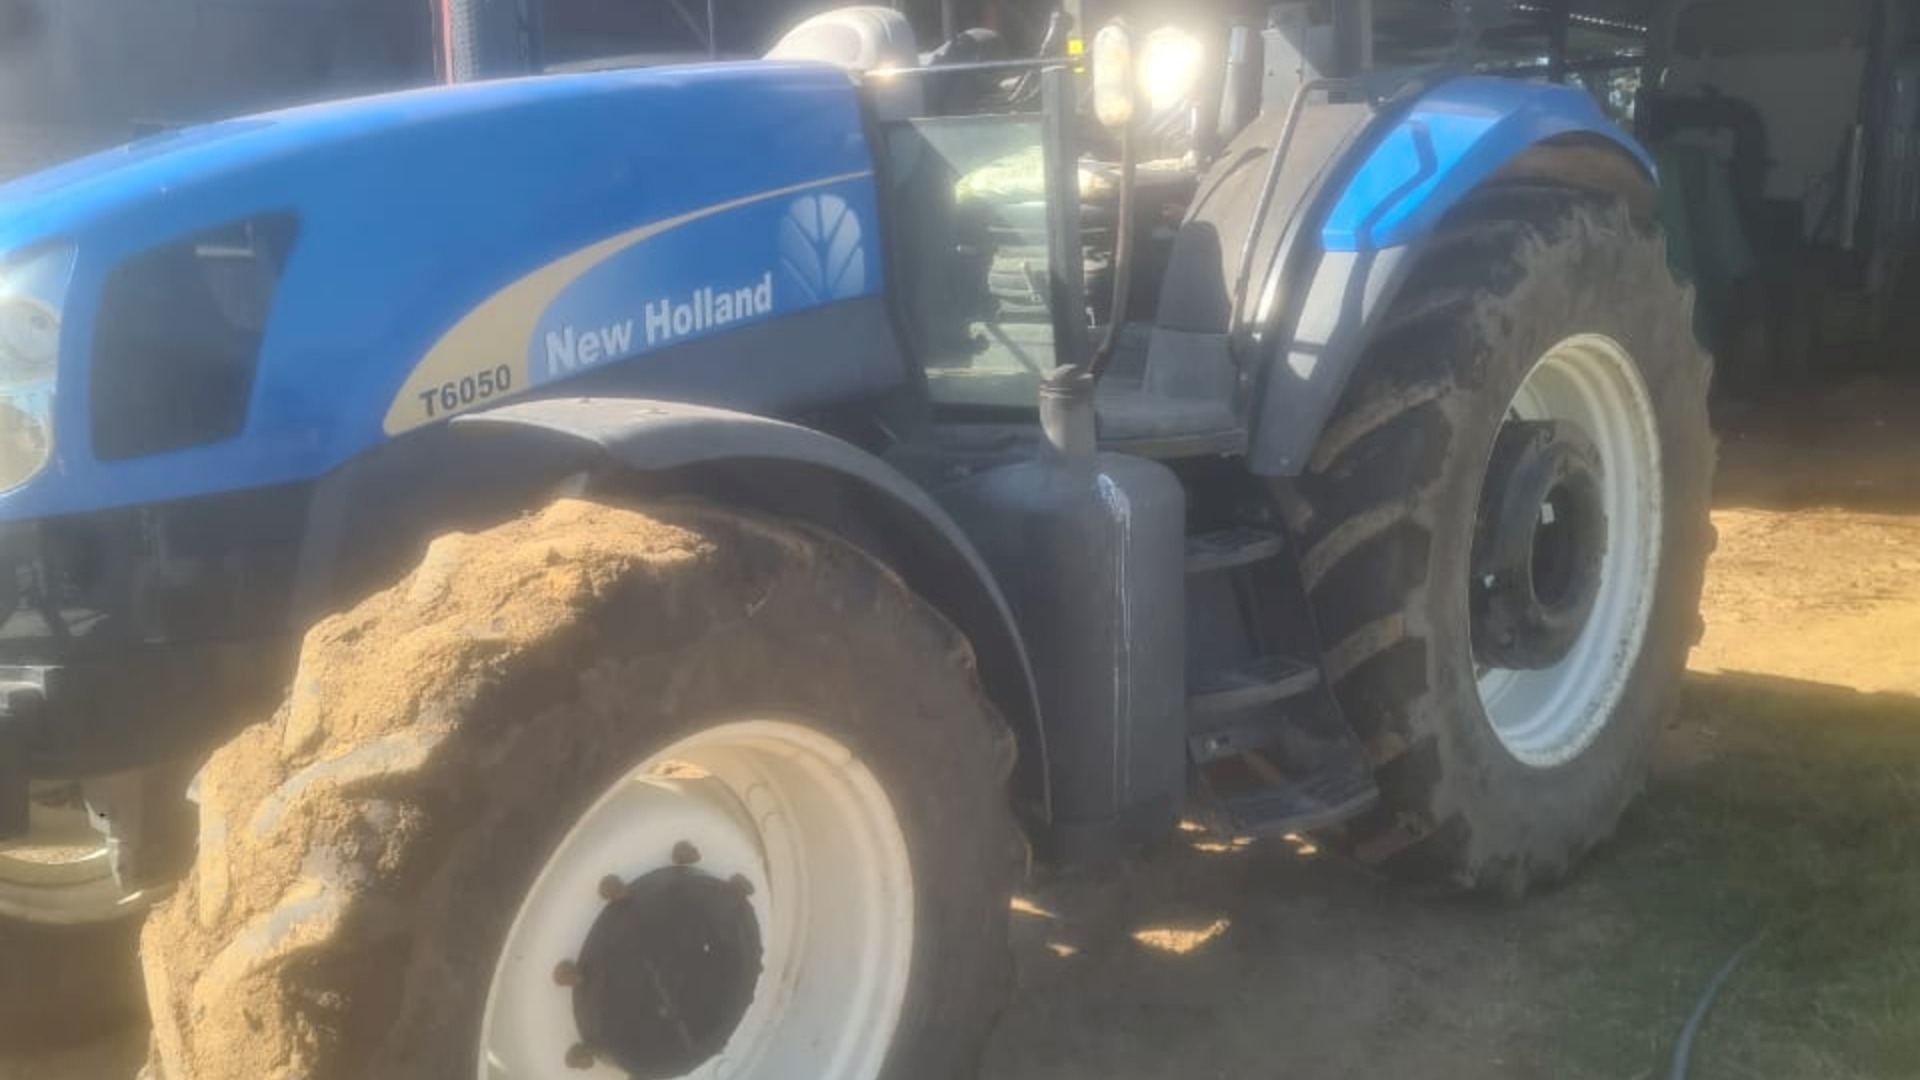 New Holland Tractors New Holland T6050 2012 for sale by Farm Implements 4 U | Truck & Trailer Marketplaces